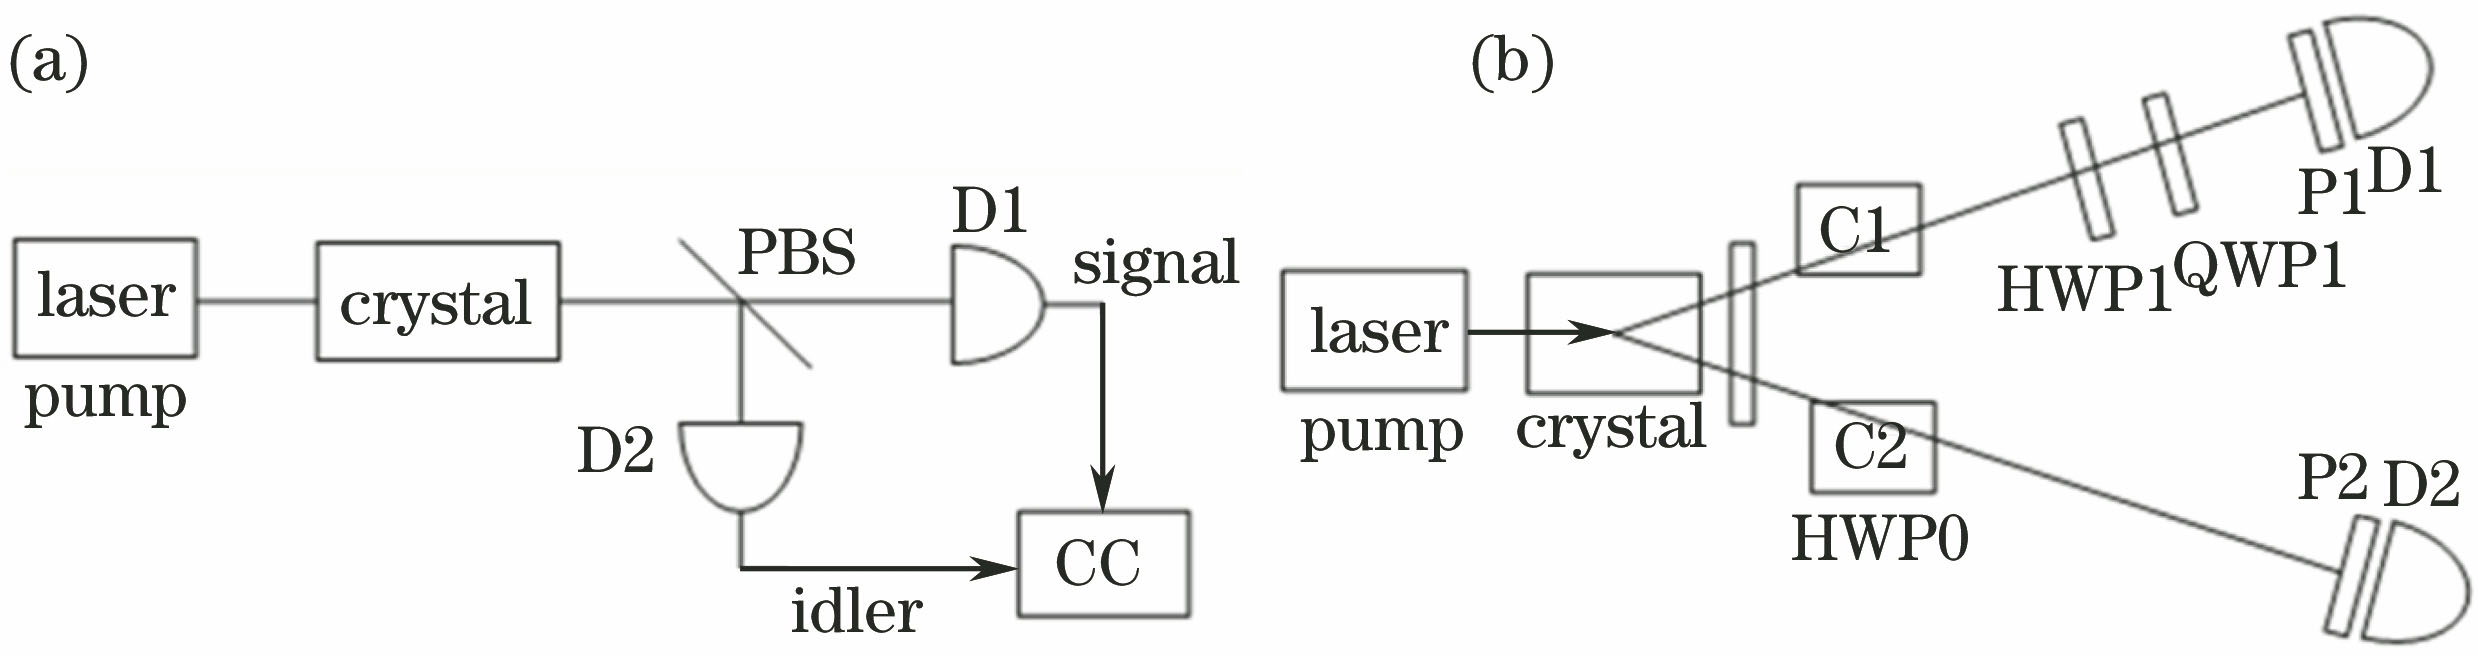 Schematic of experimental device for generation of entangled photon pairs via type-II spontaneous parametric down conversion. (a) Collinear matching; (b) non-collinear matching